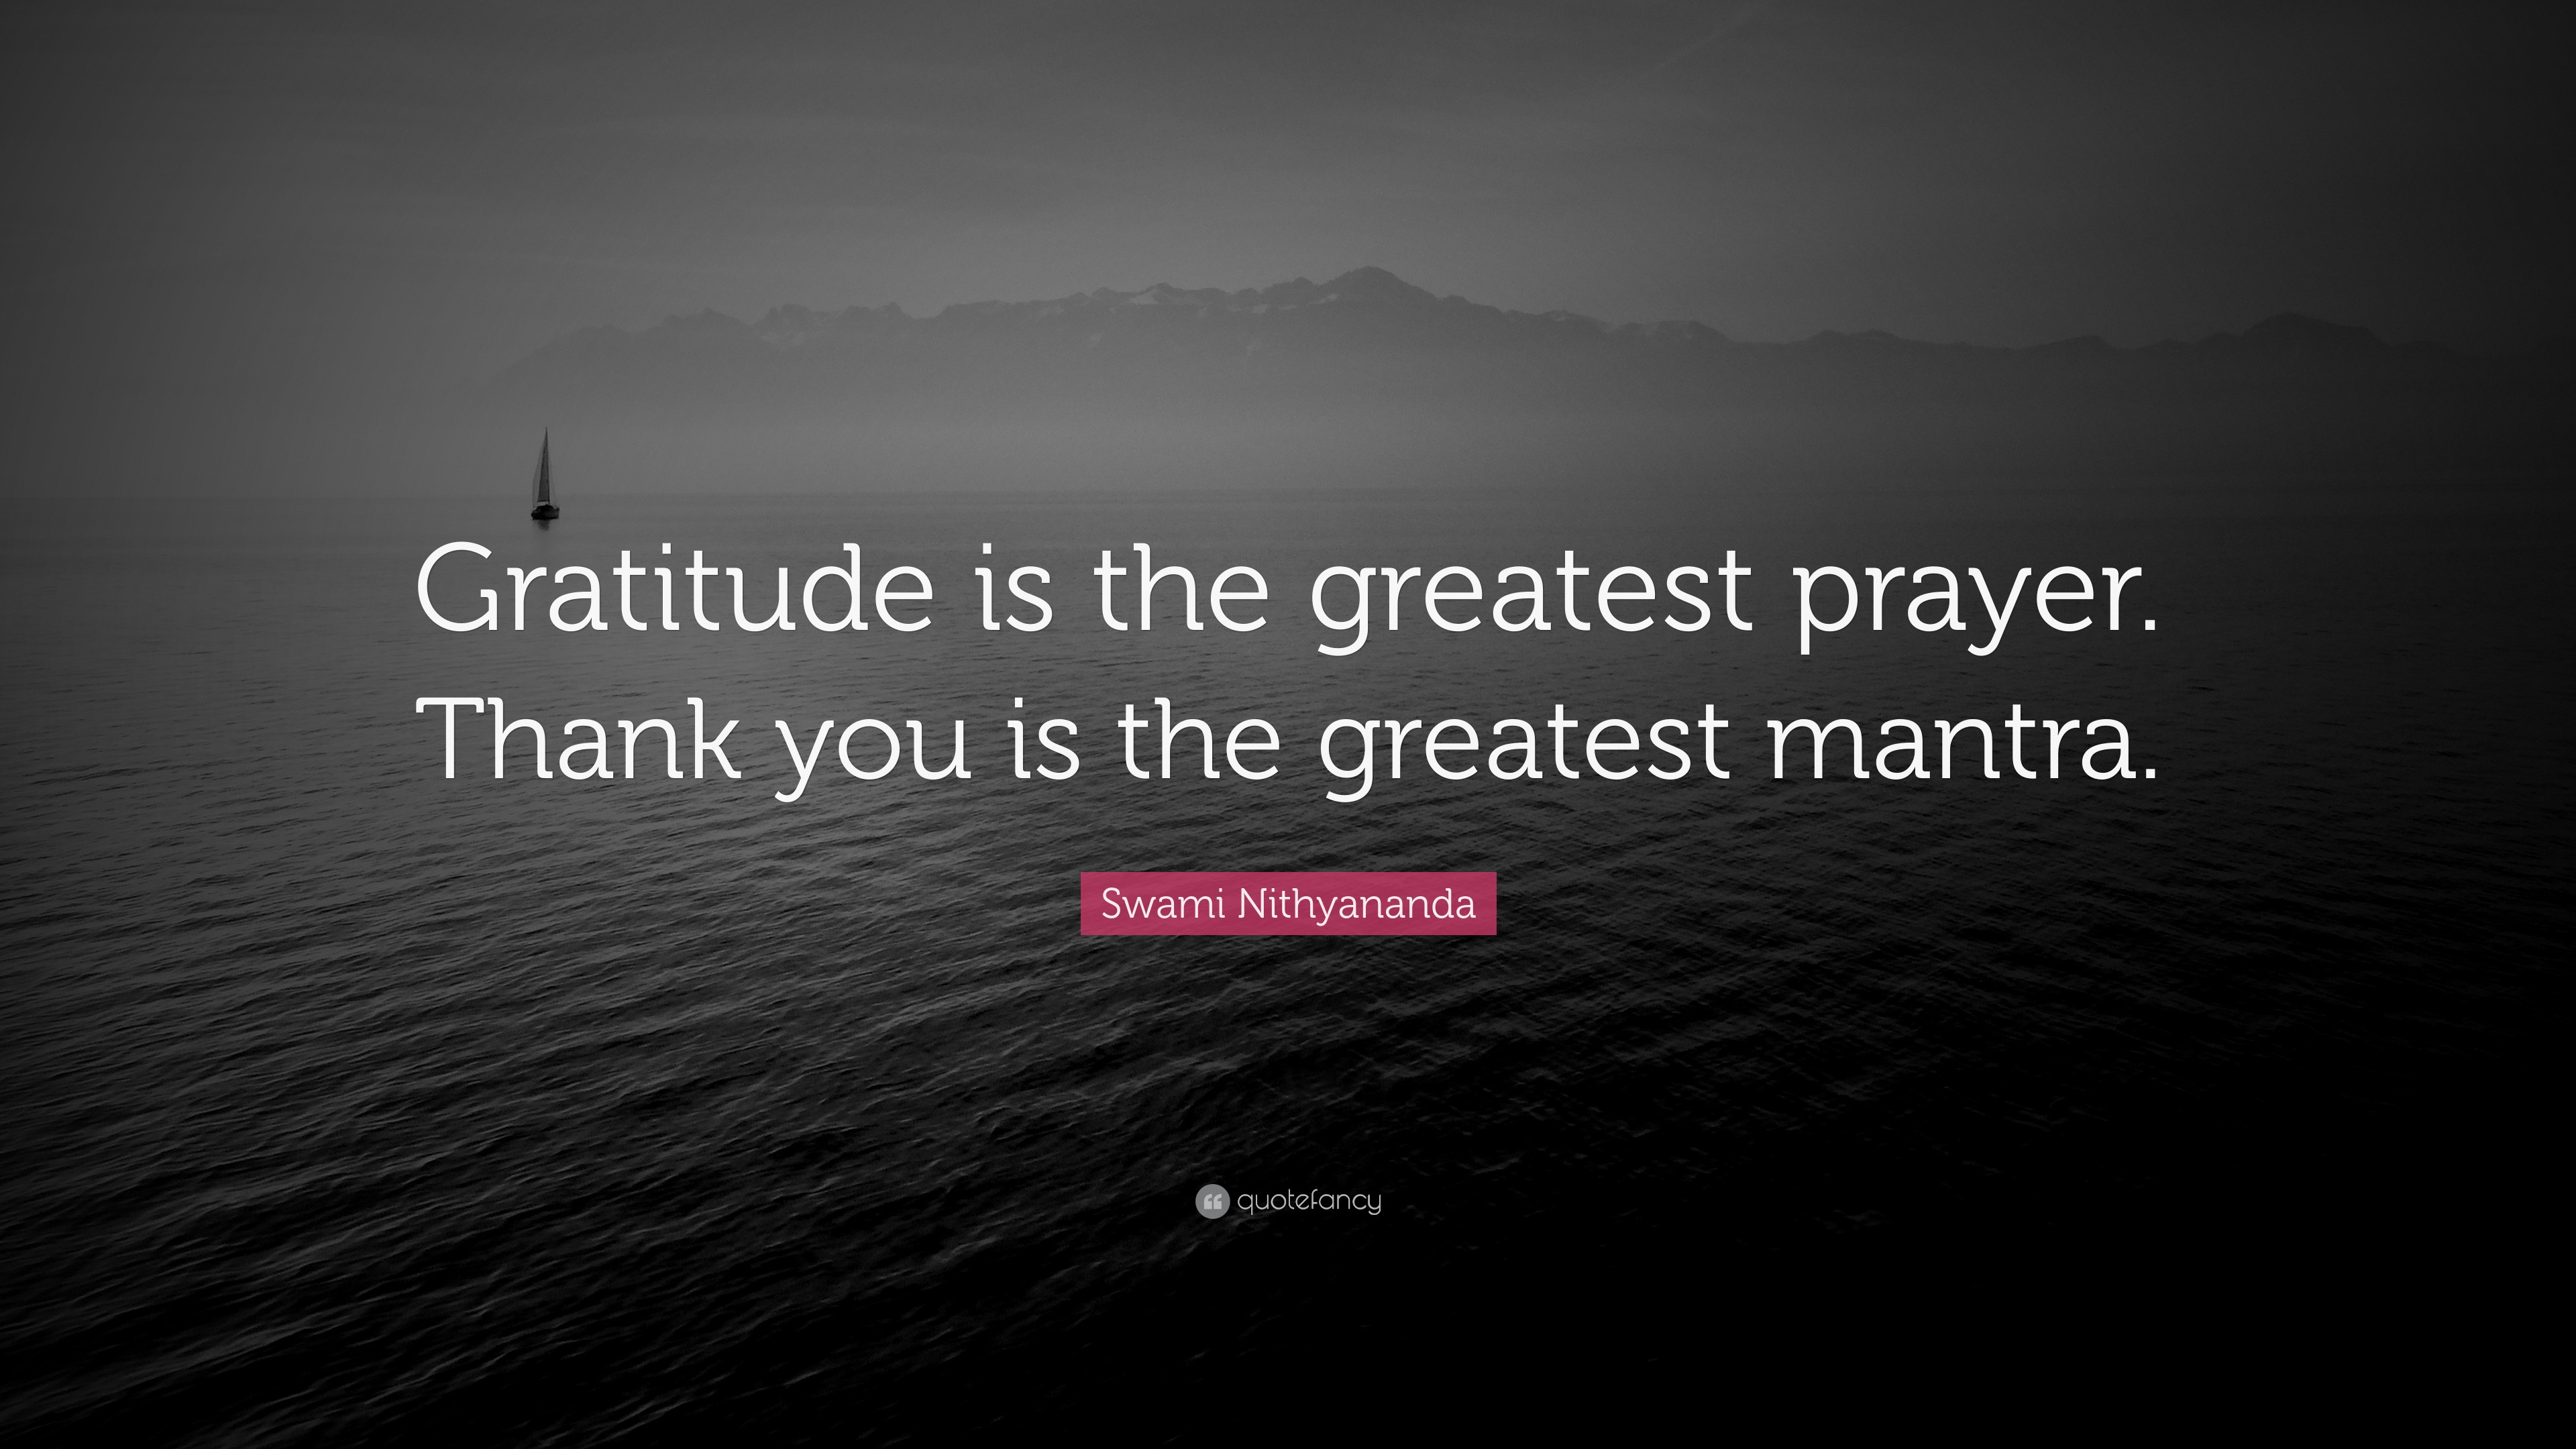 Swami Nithyananda Quote Gratitude Is The Greatest Prayer Thank You Is The Greatest Mantra